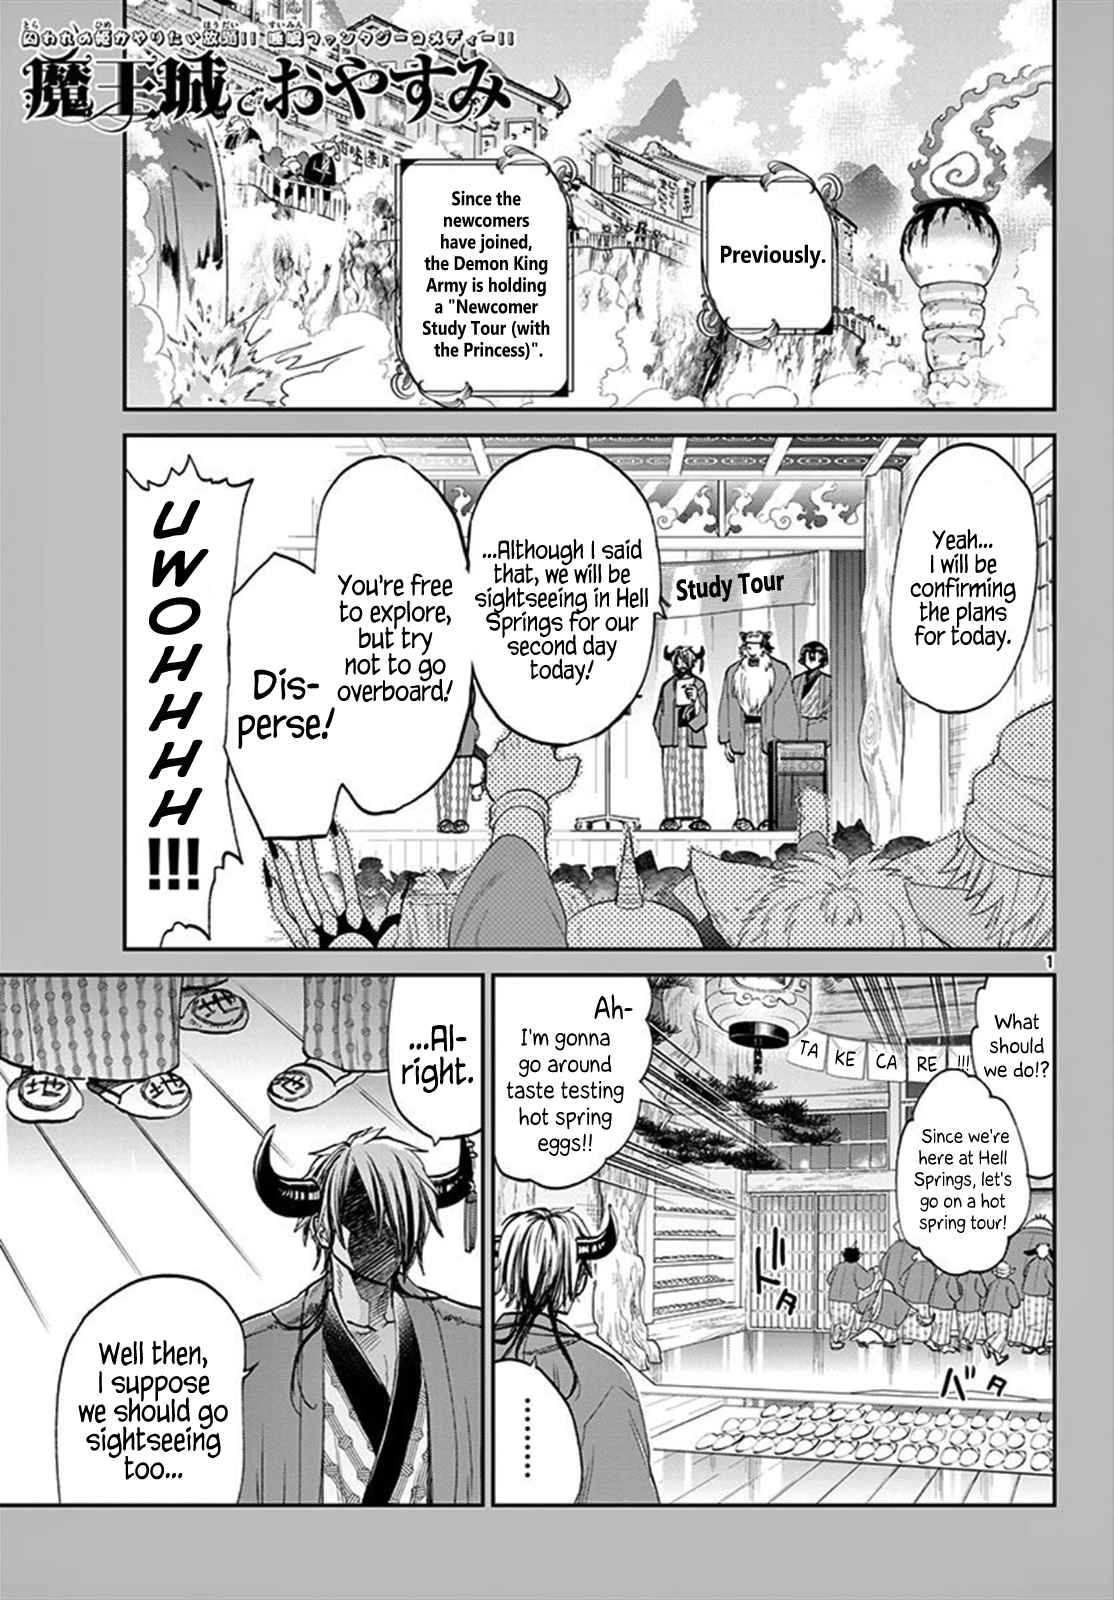 Maou jou de Oyasumi Vol. 8 Ch. 99 Visiting the Nicest Places of Hell Springs Over and Over